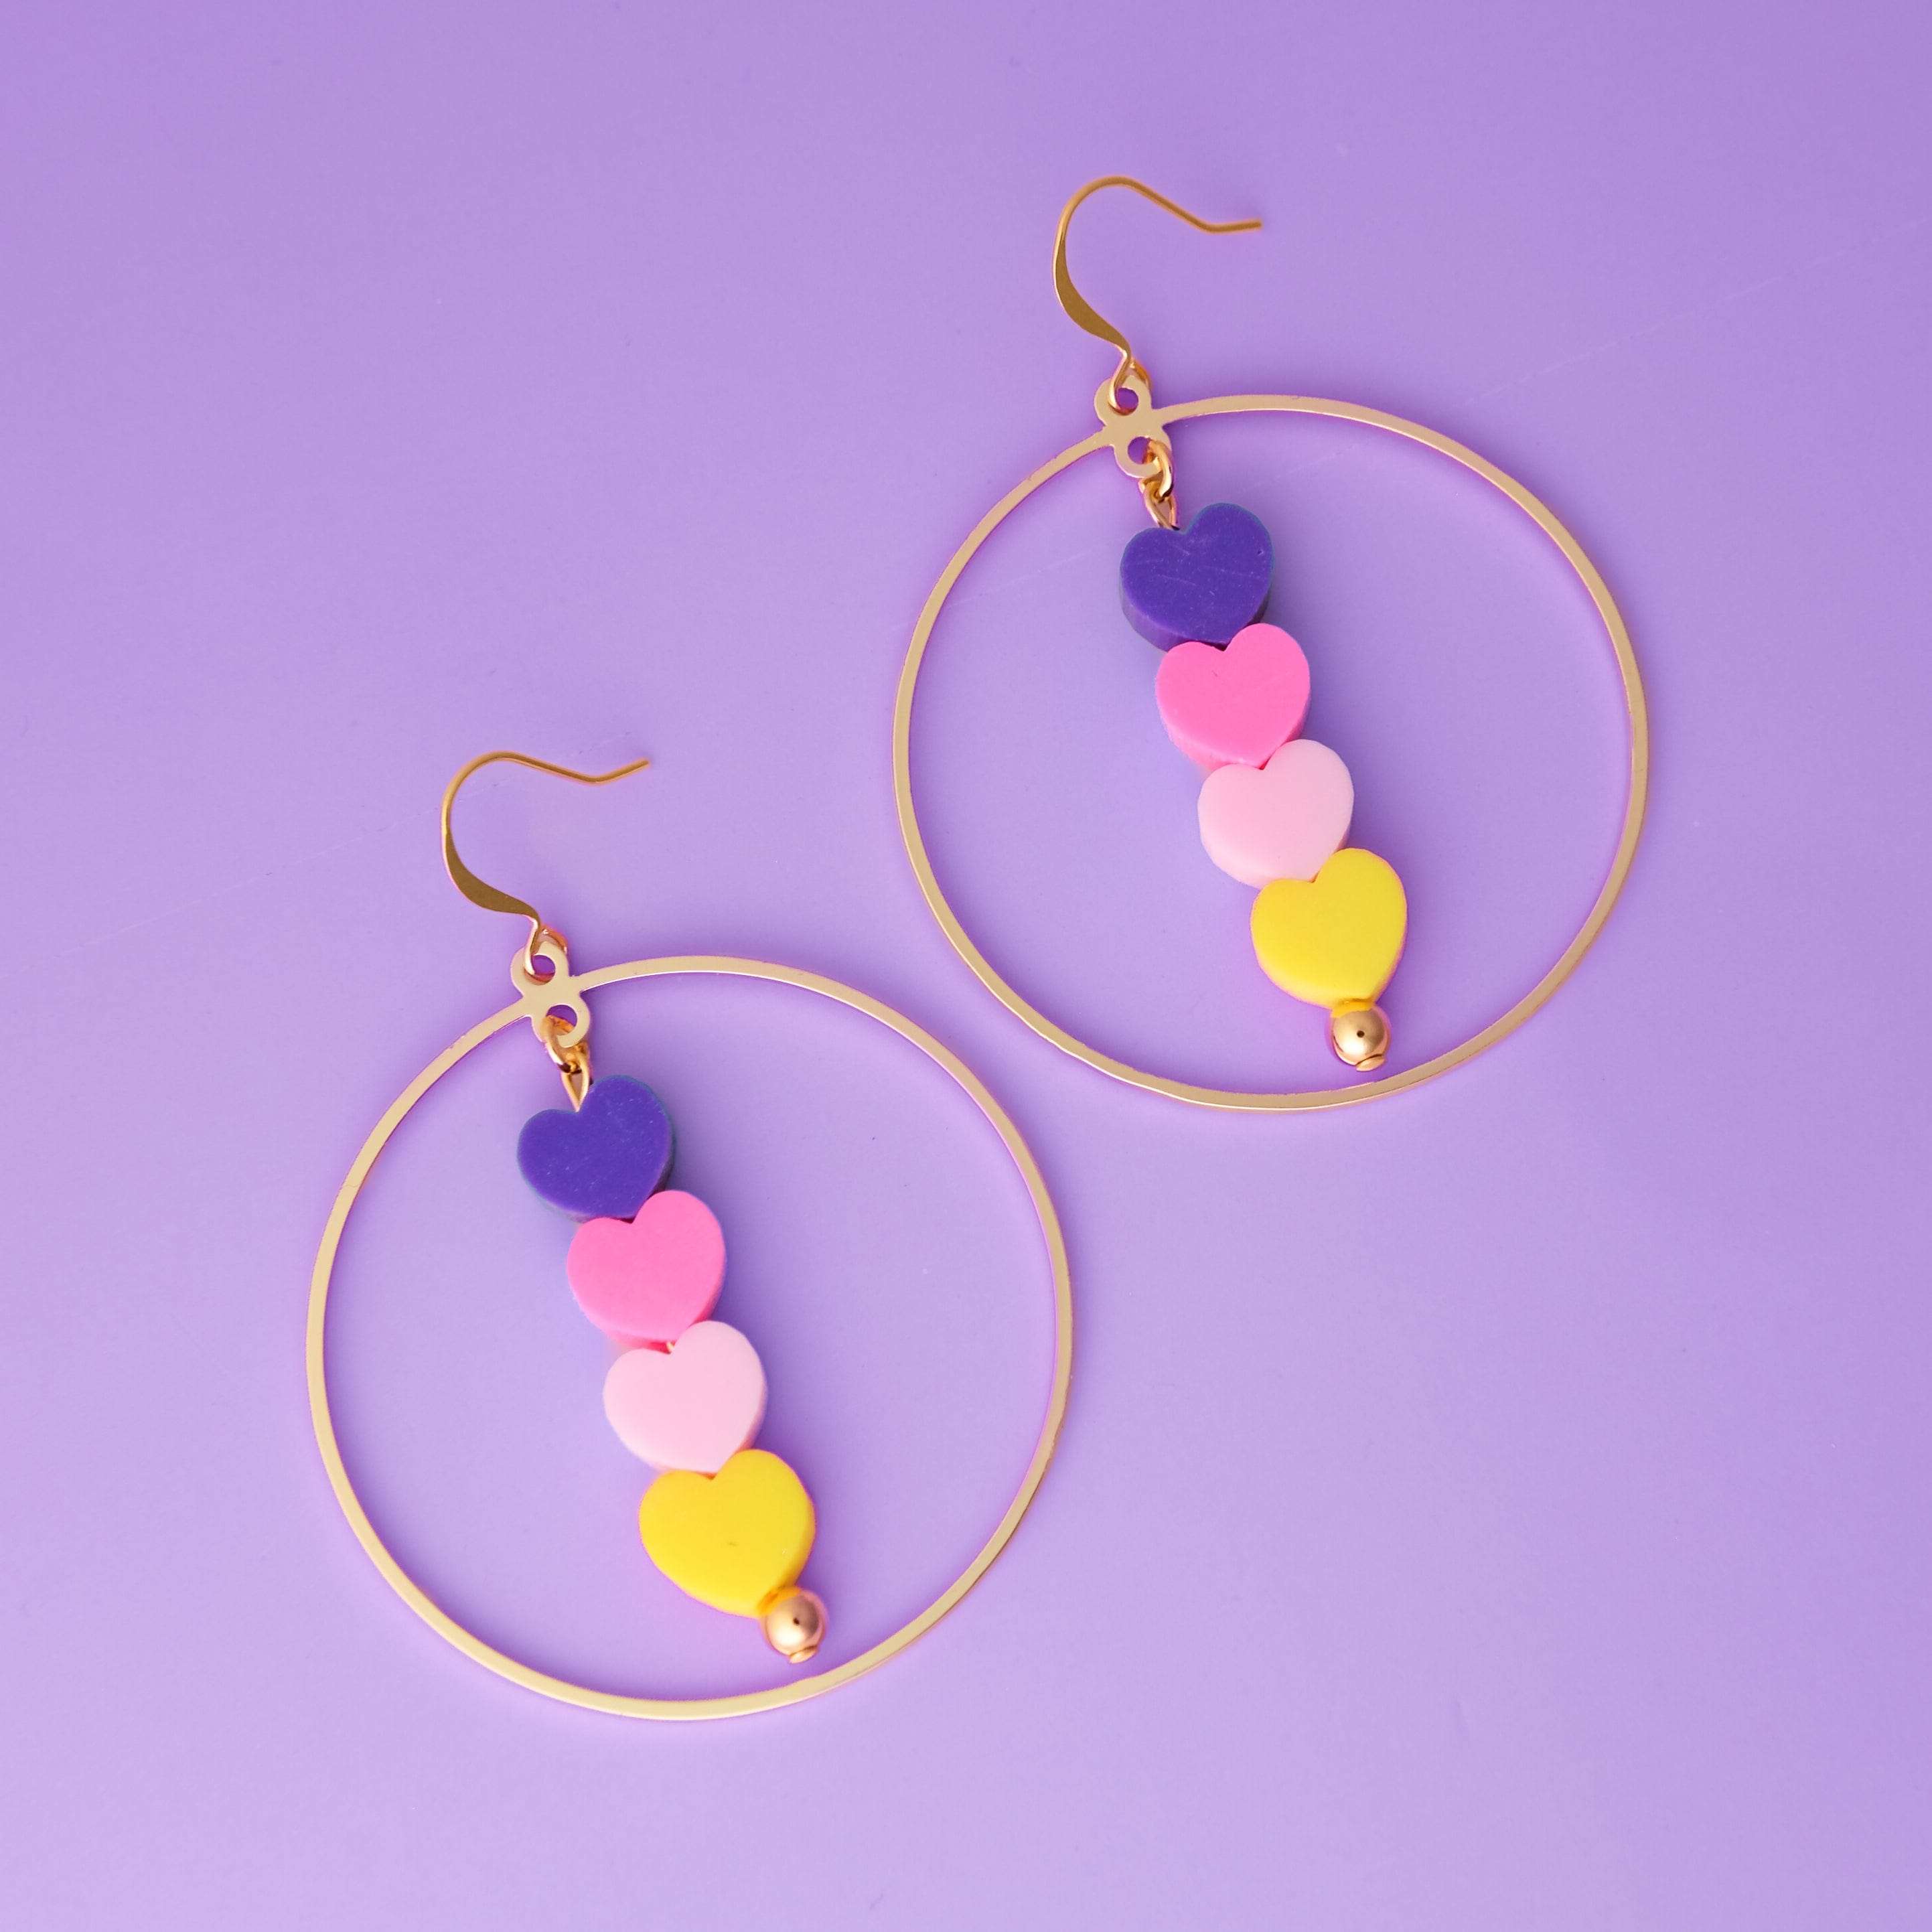 Tiny hearts halo hoop dangly earrings #color_sunsets